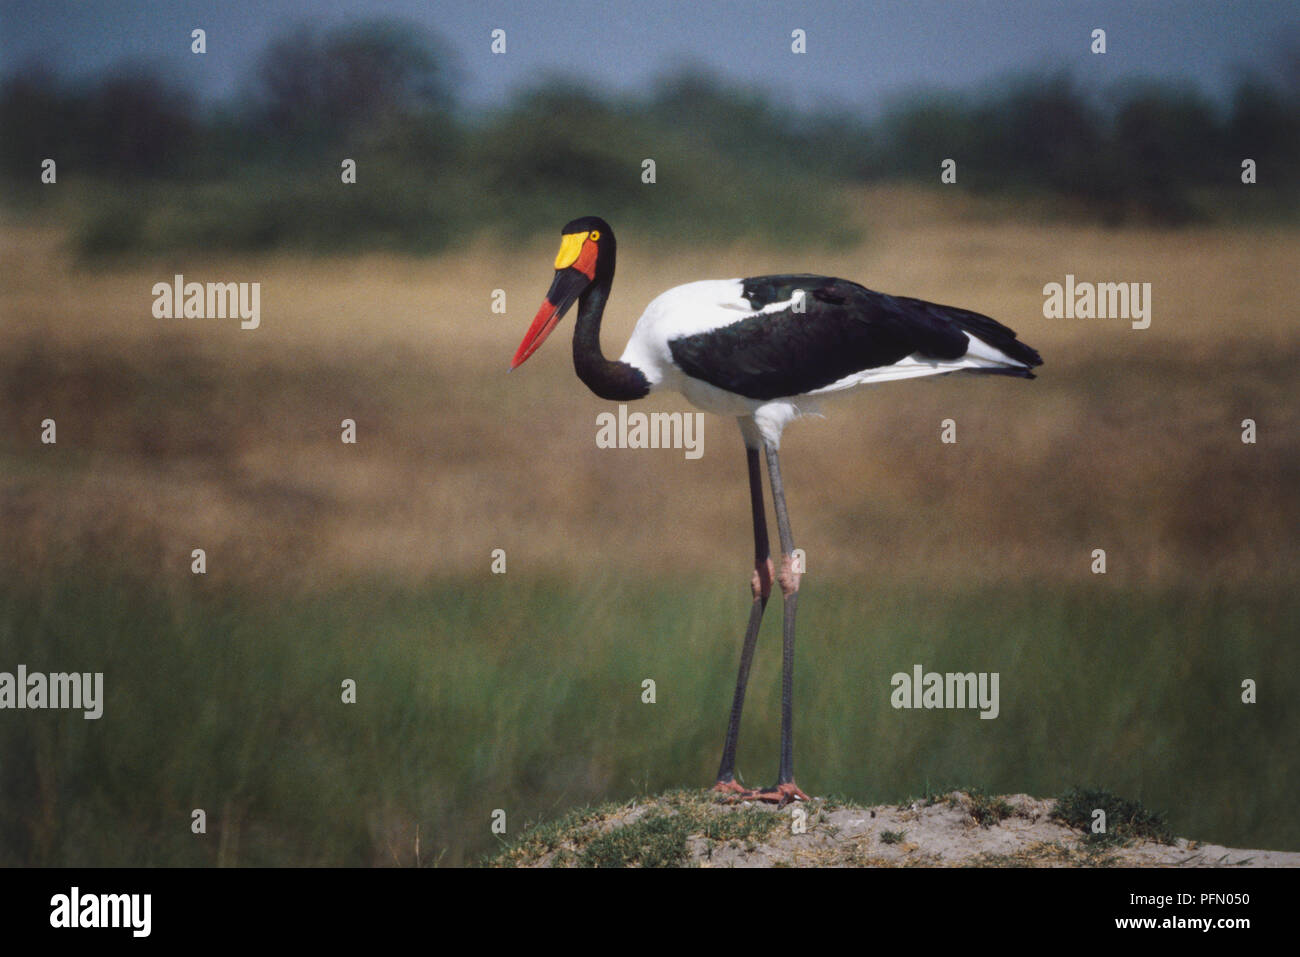 Long-Toed Plover, Vanellus crassirostris, black and white plumed bird, jointed legs, elogated neck, yellow head and a thin red bill, standing on rock before a savanna, side view. Stock Photo